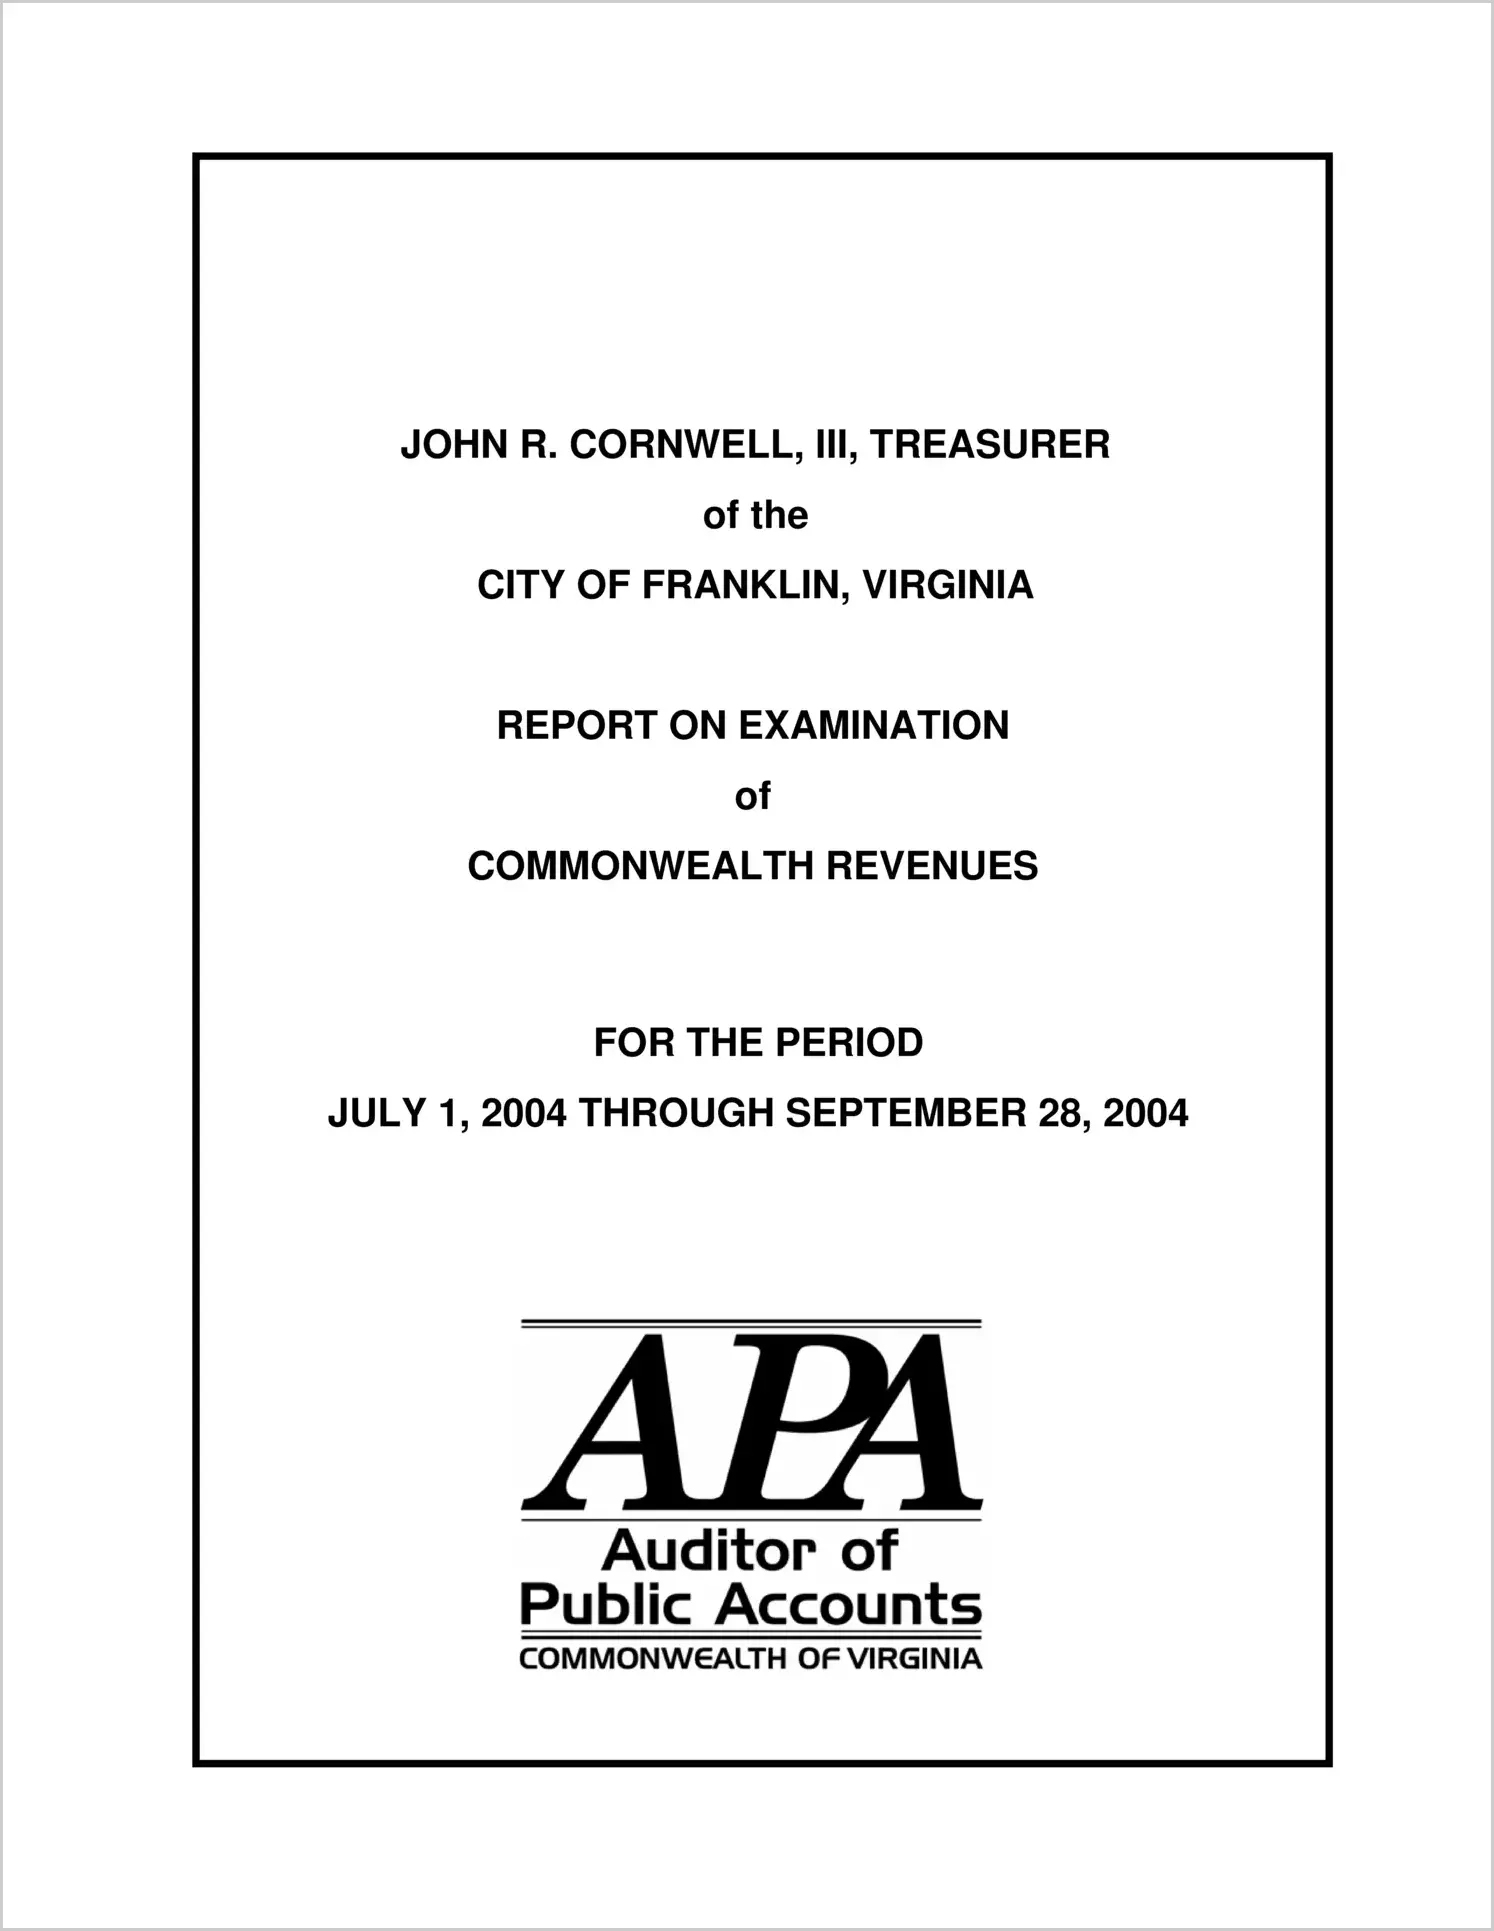 Treasurer? Accountability to the Commonwealth of John R. Cornwell, III, Treasurer of the City of Franklin, for the period July 1, 2004 through September 28, 2004